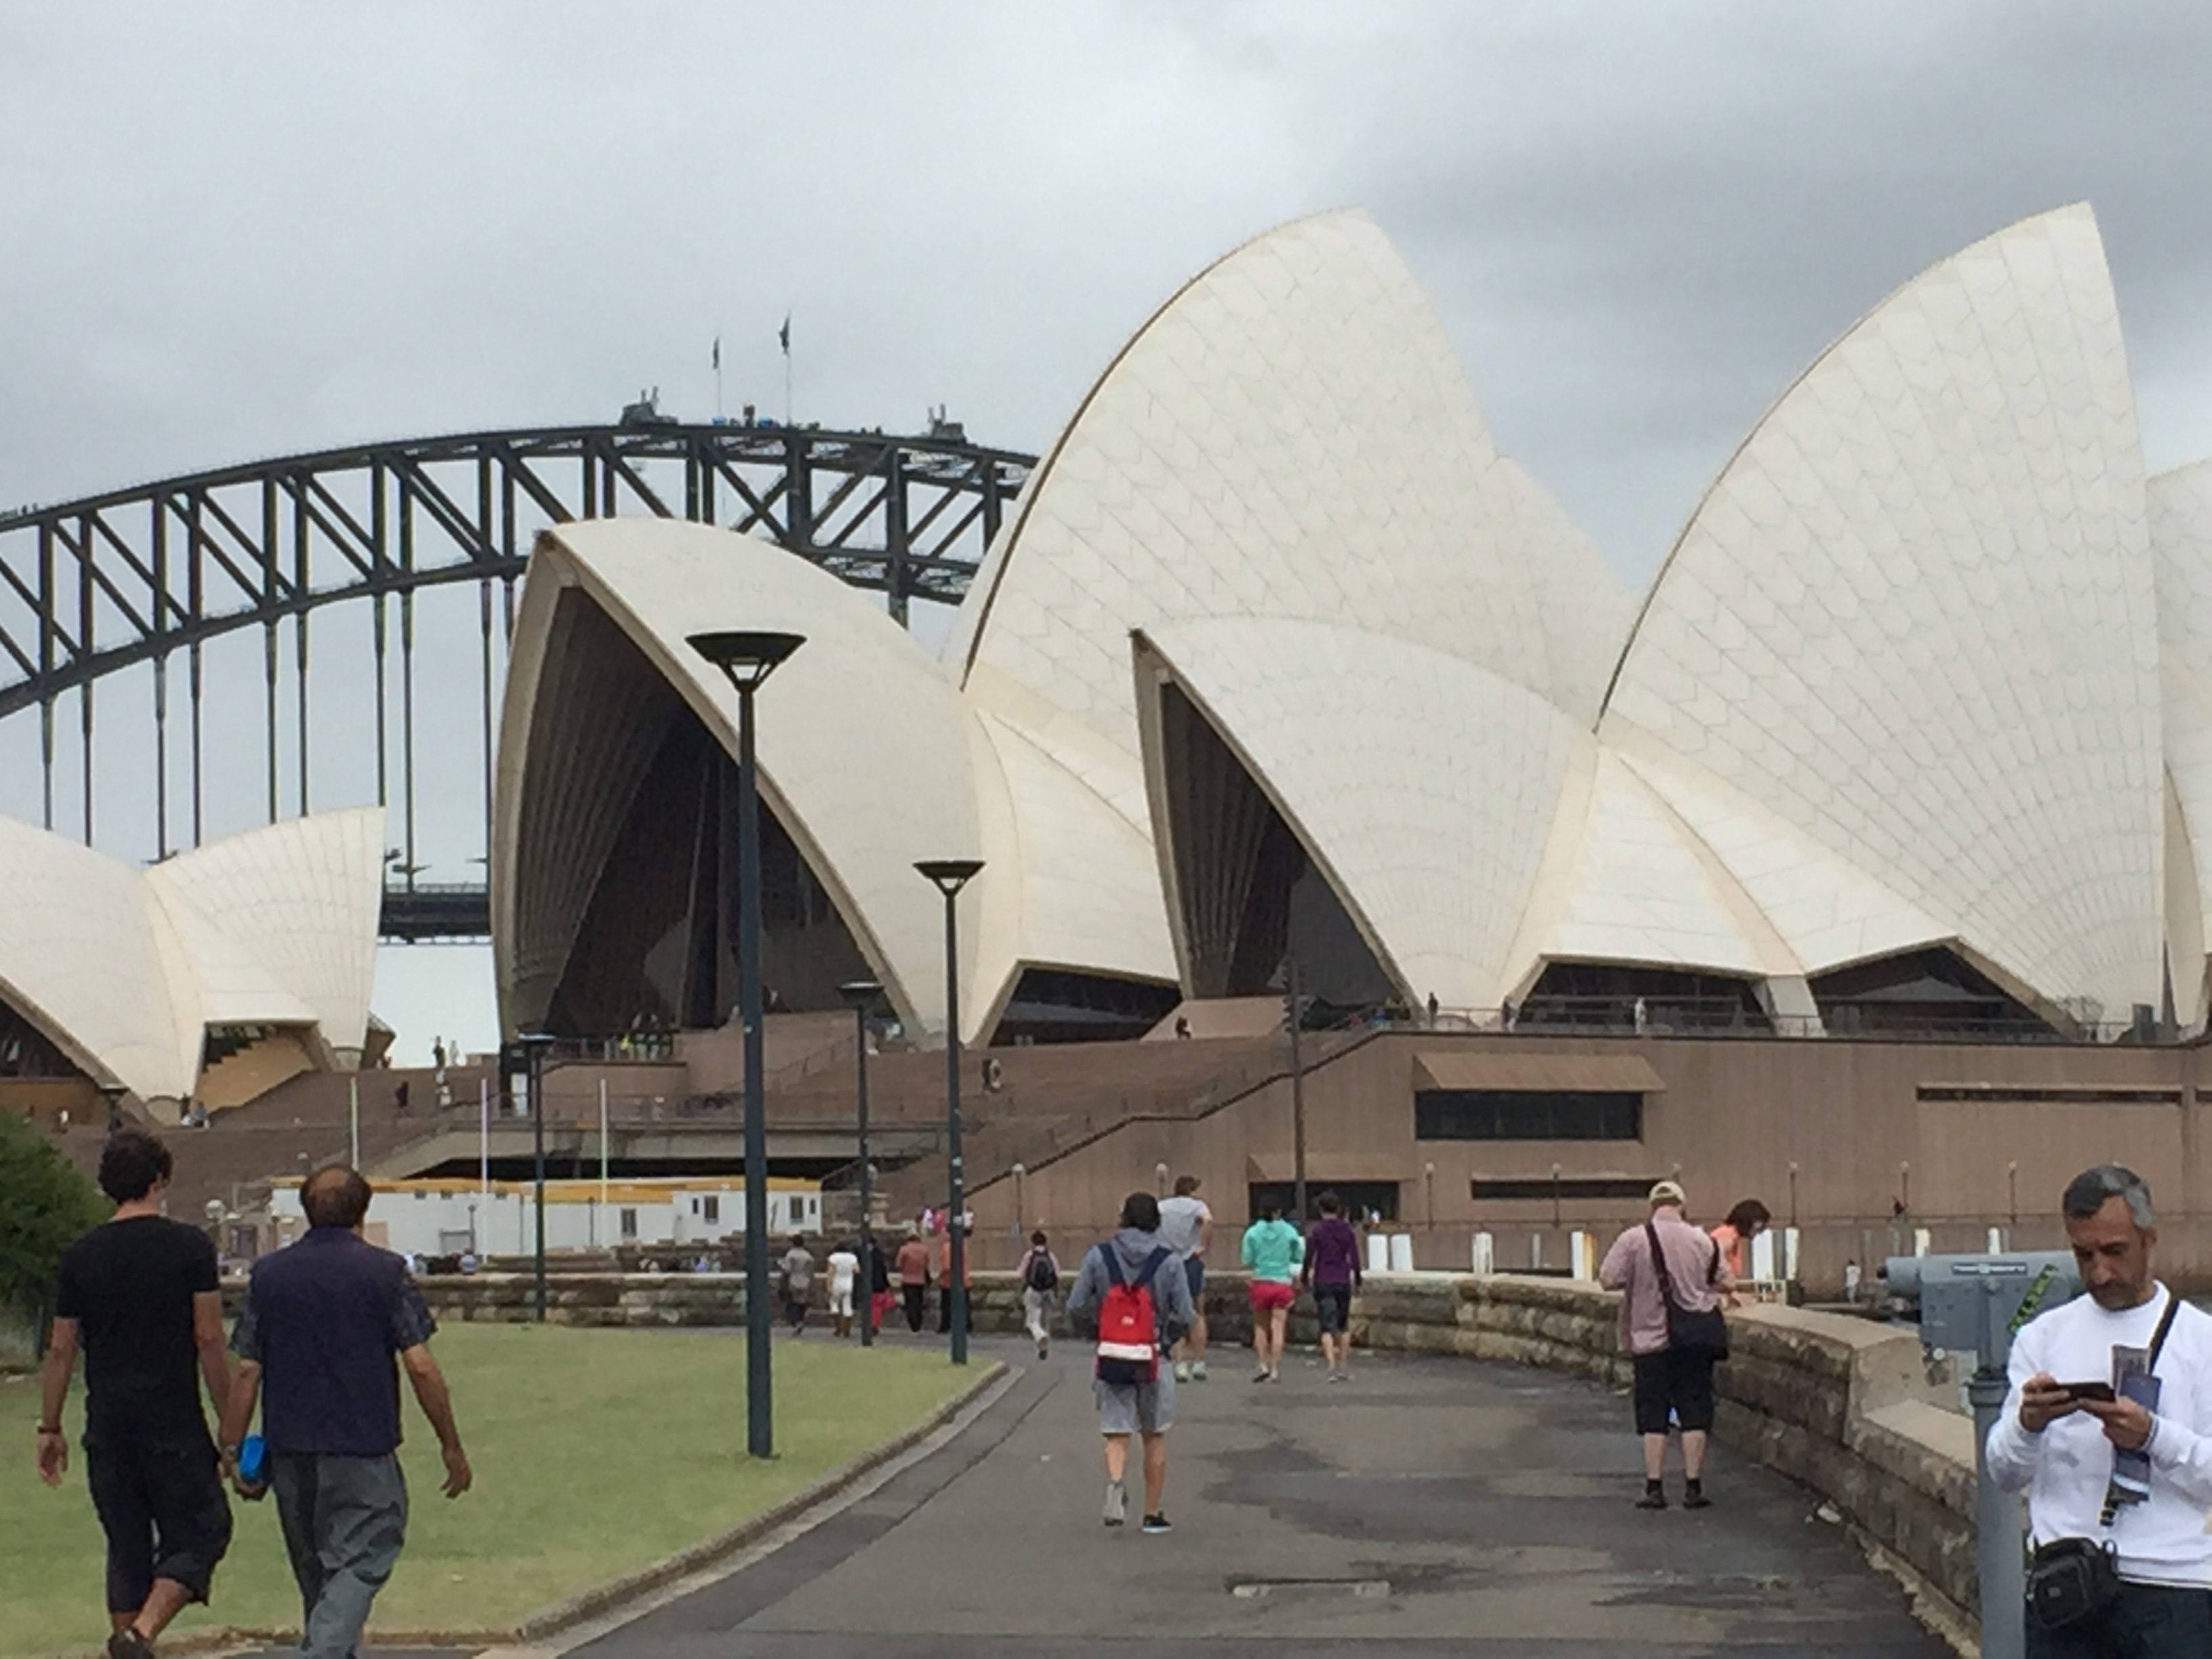 Sydney Opera House with the Harbour Bridge  in background.